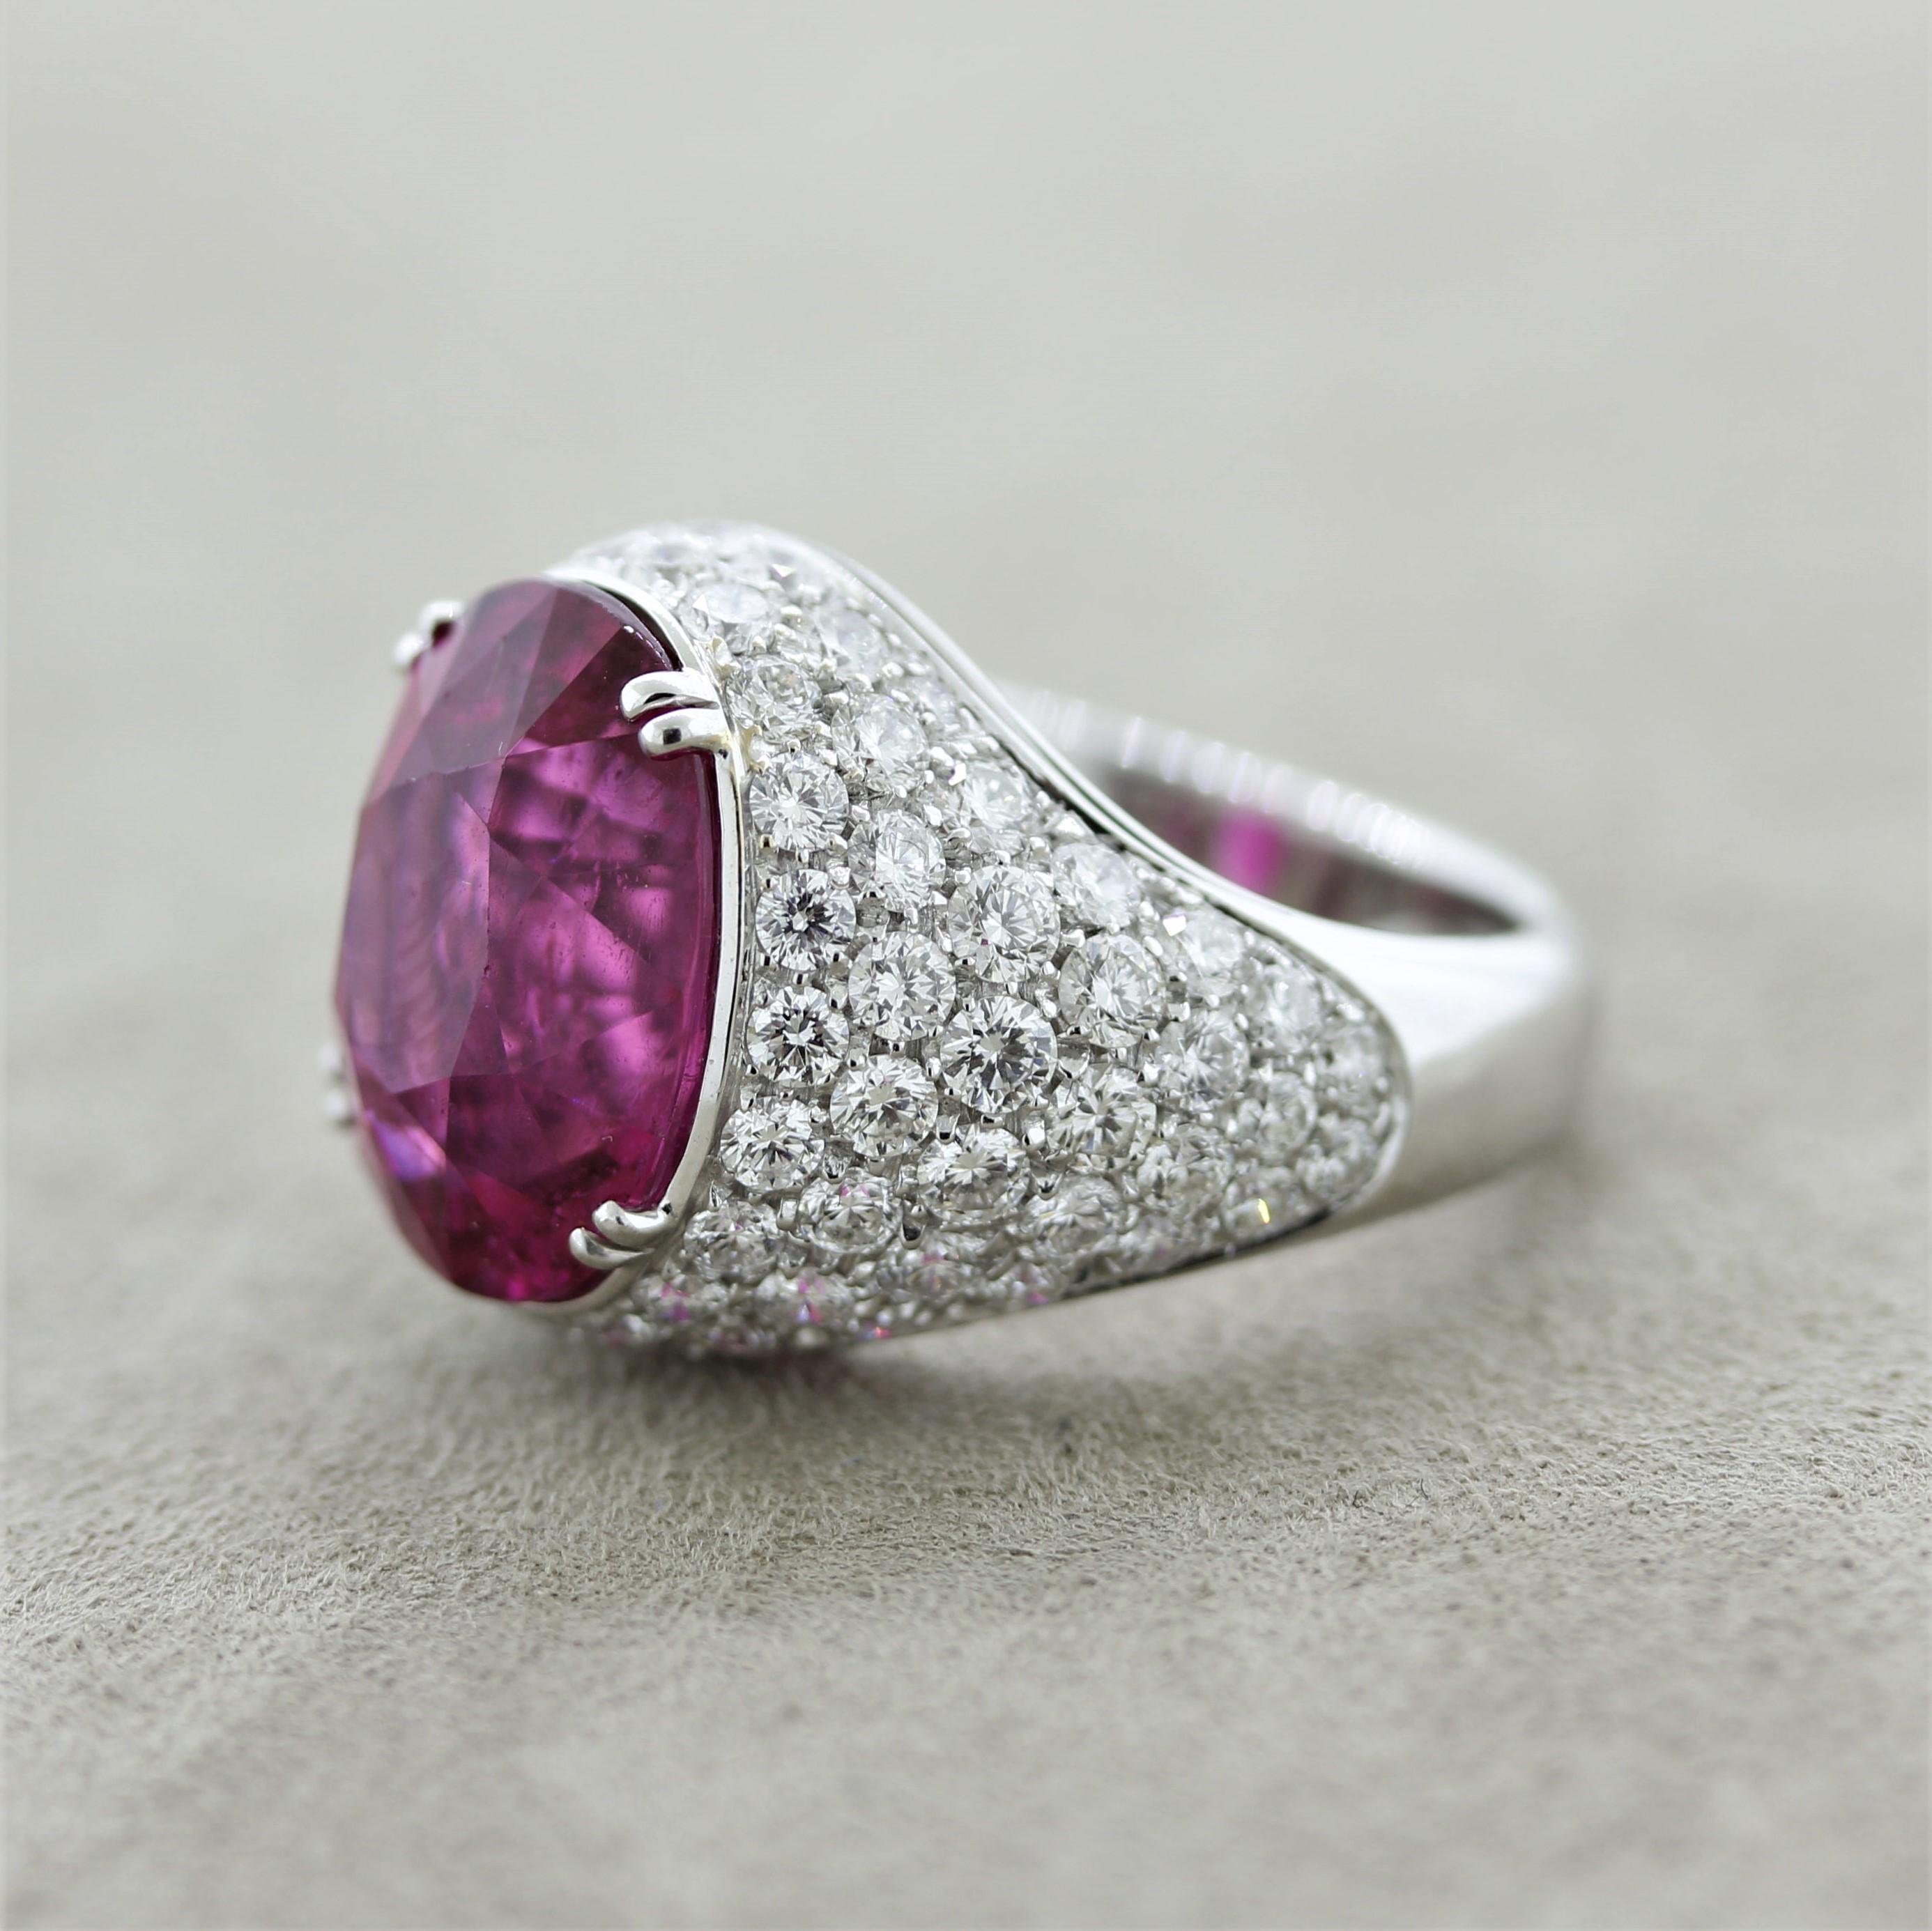 Mixed Cut Superb Rubellite Tourmaline Diamond Gold Ring For Sale